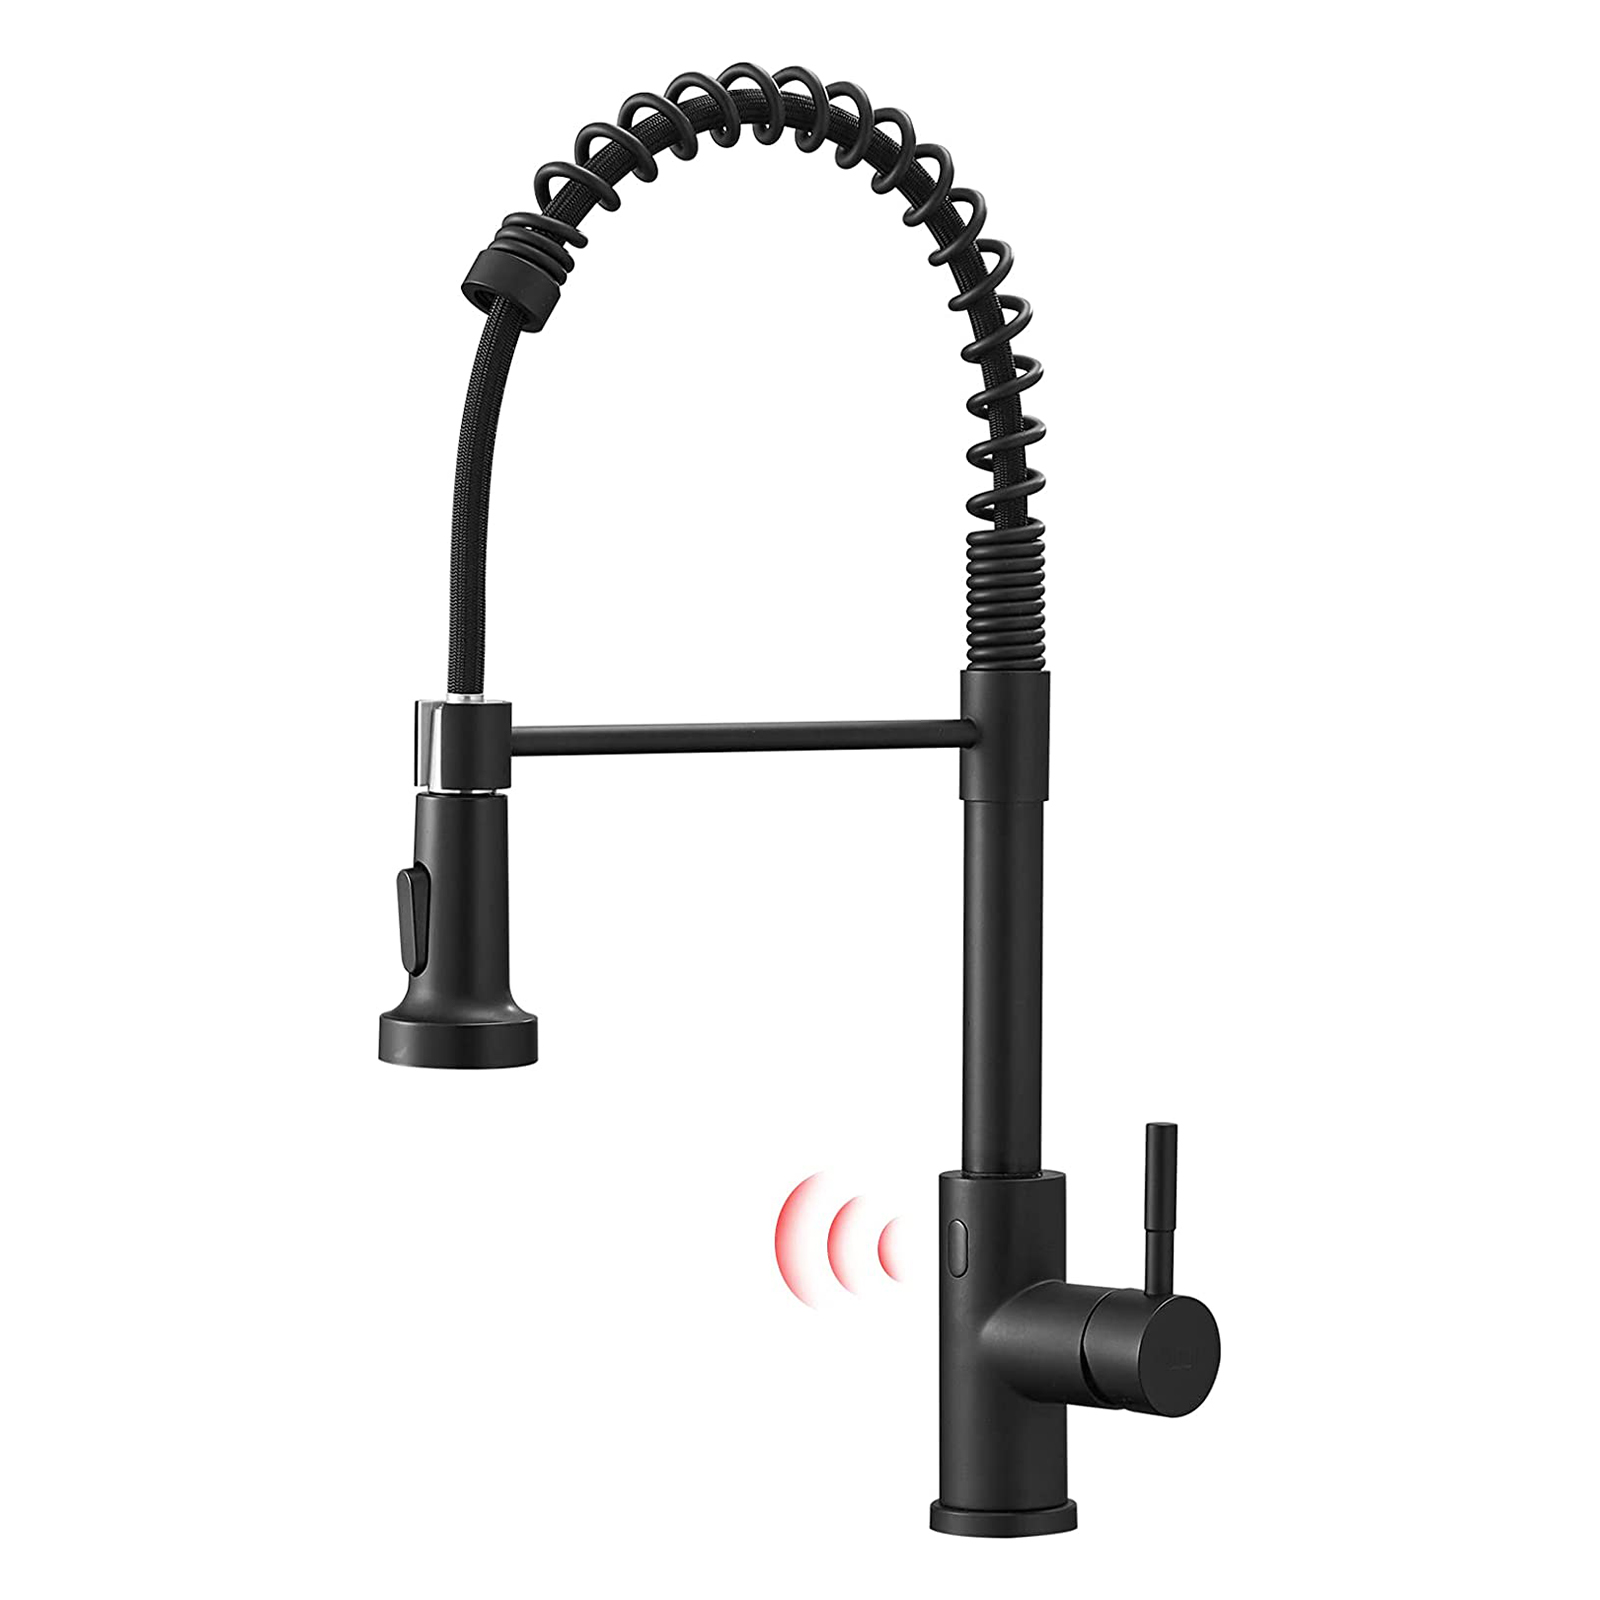 FLG Black Touchless Kitchen Faucet with Pull Down Sprayer, Motion Sensor Activated Hands-Free Single Handle Kitchen Sink Faucet, Single Hole Smart Kitchen Spring Faucet, Solid Brass, Matte Black